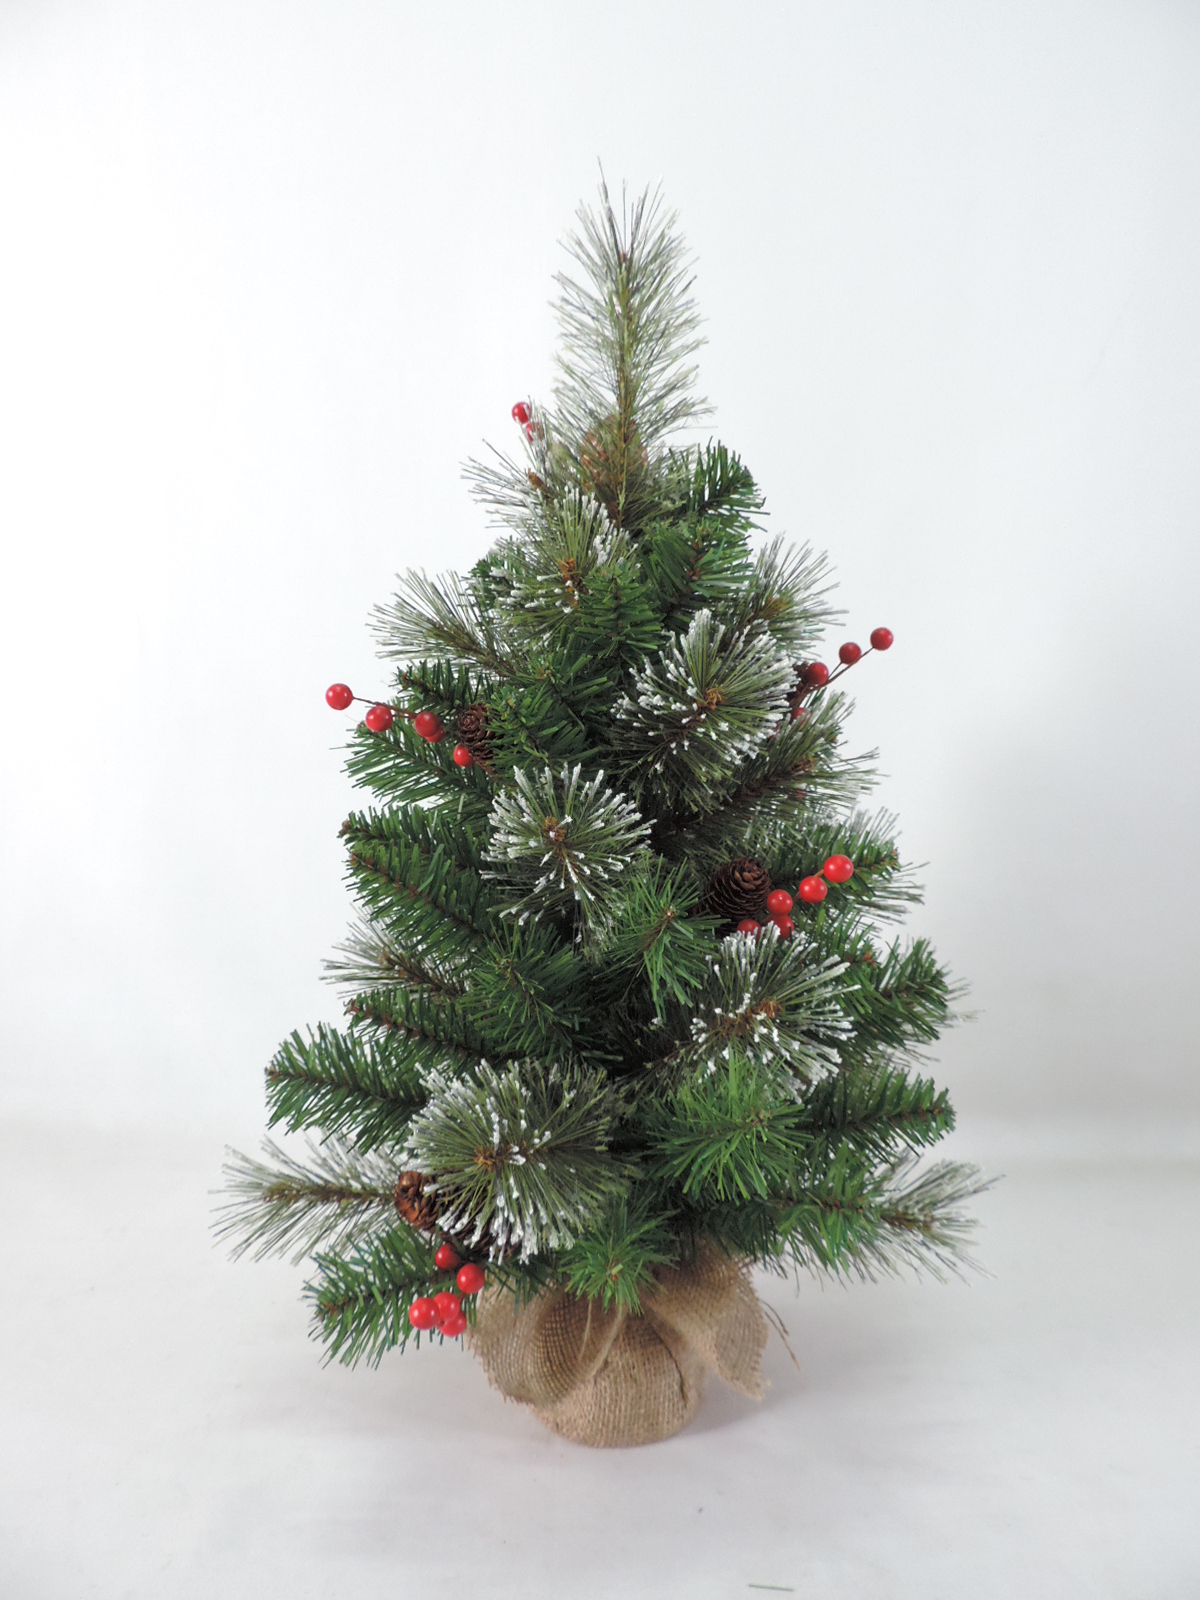 The 7 Best Artificial Christmas Trees | Reviews by Wirecutter